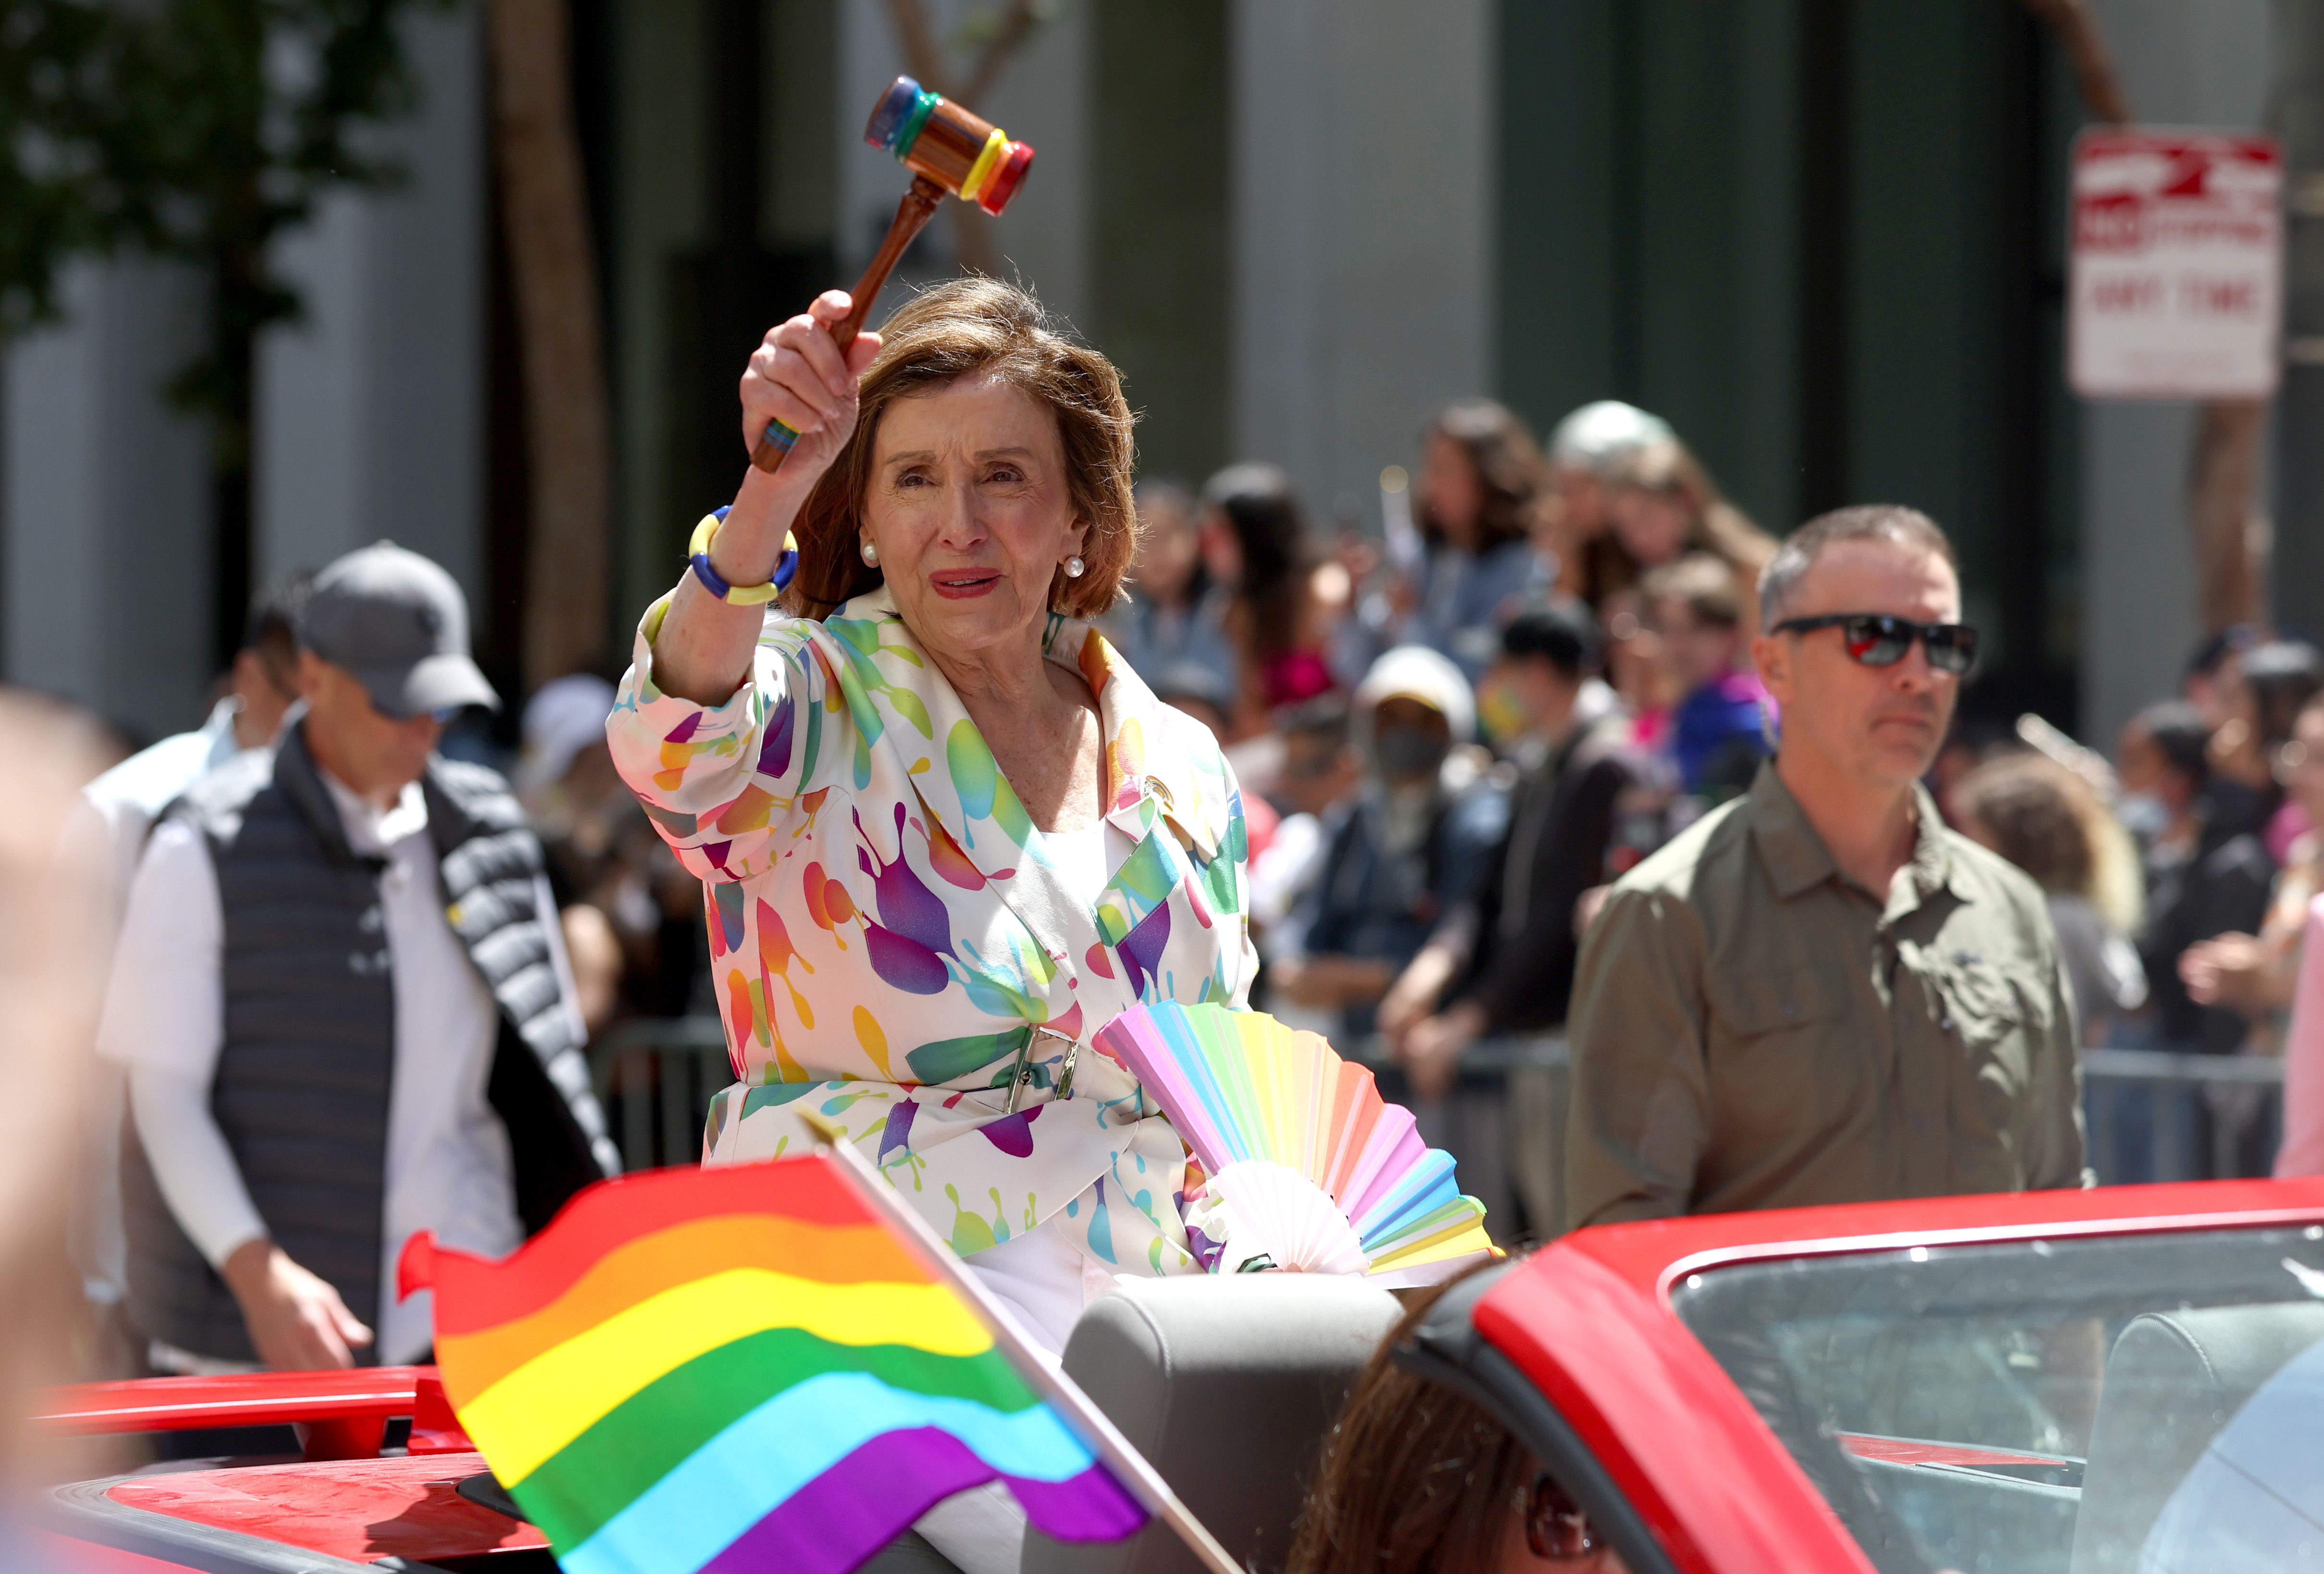 Speaker of the House Nancy Pelosi (D-CA) holds a gavel during the 52nd Annual San Francisco Pride Parade and Celebration on June 26, 2022 in San Francisco, California. 